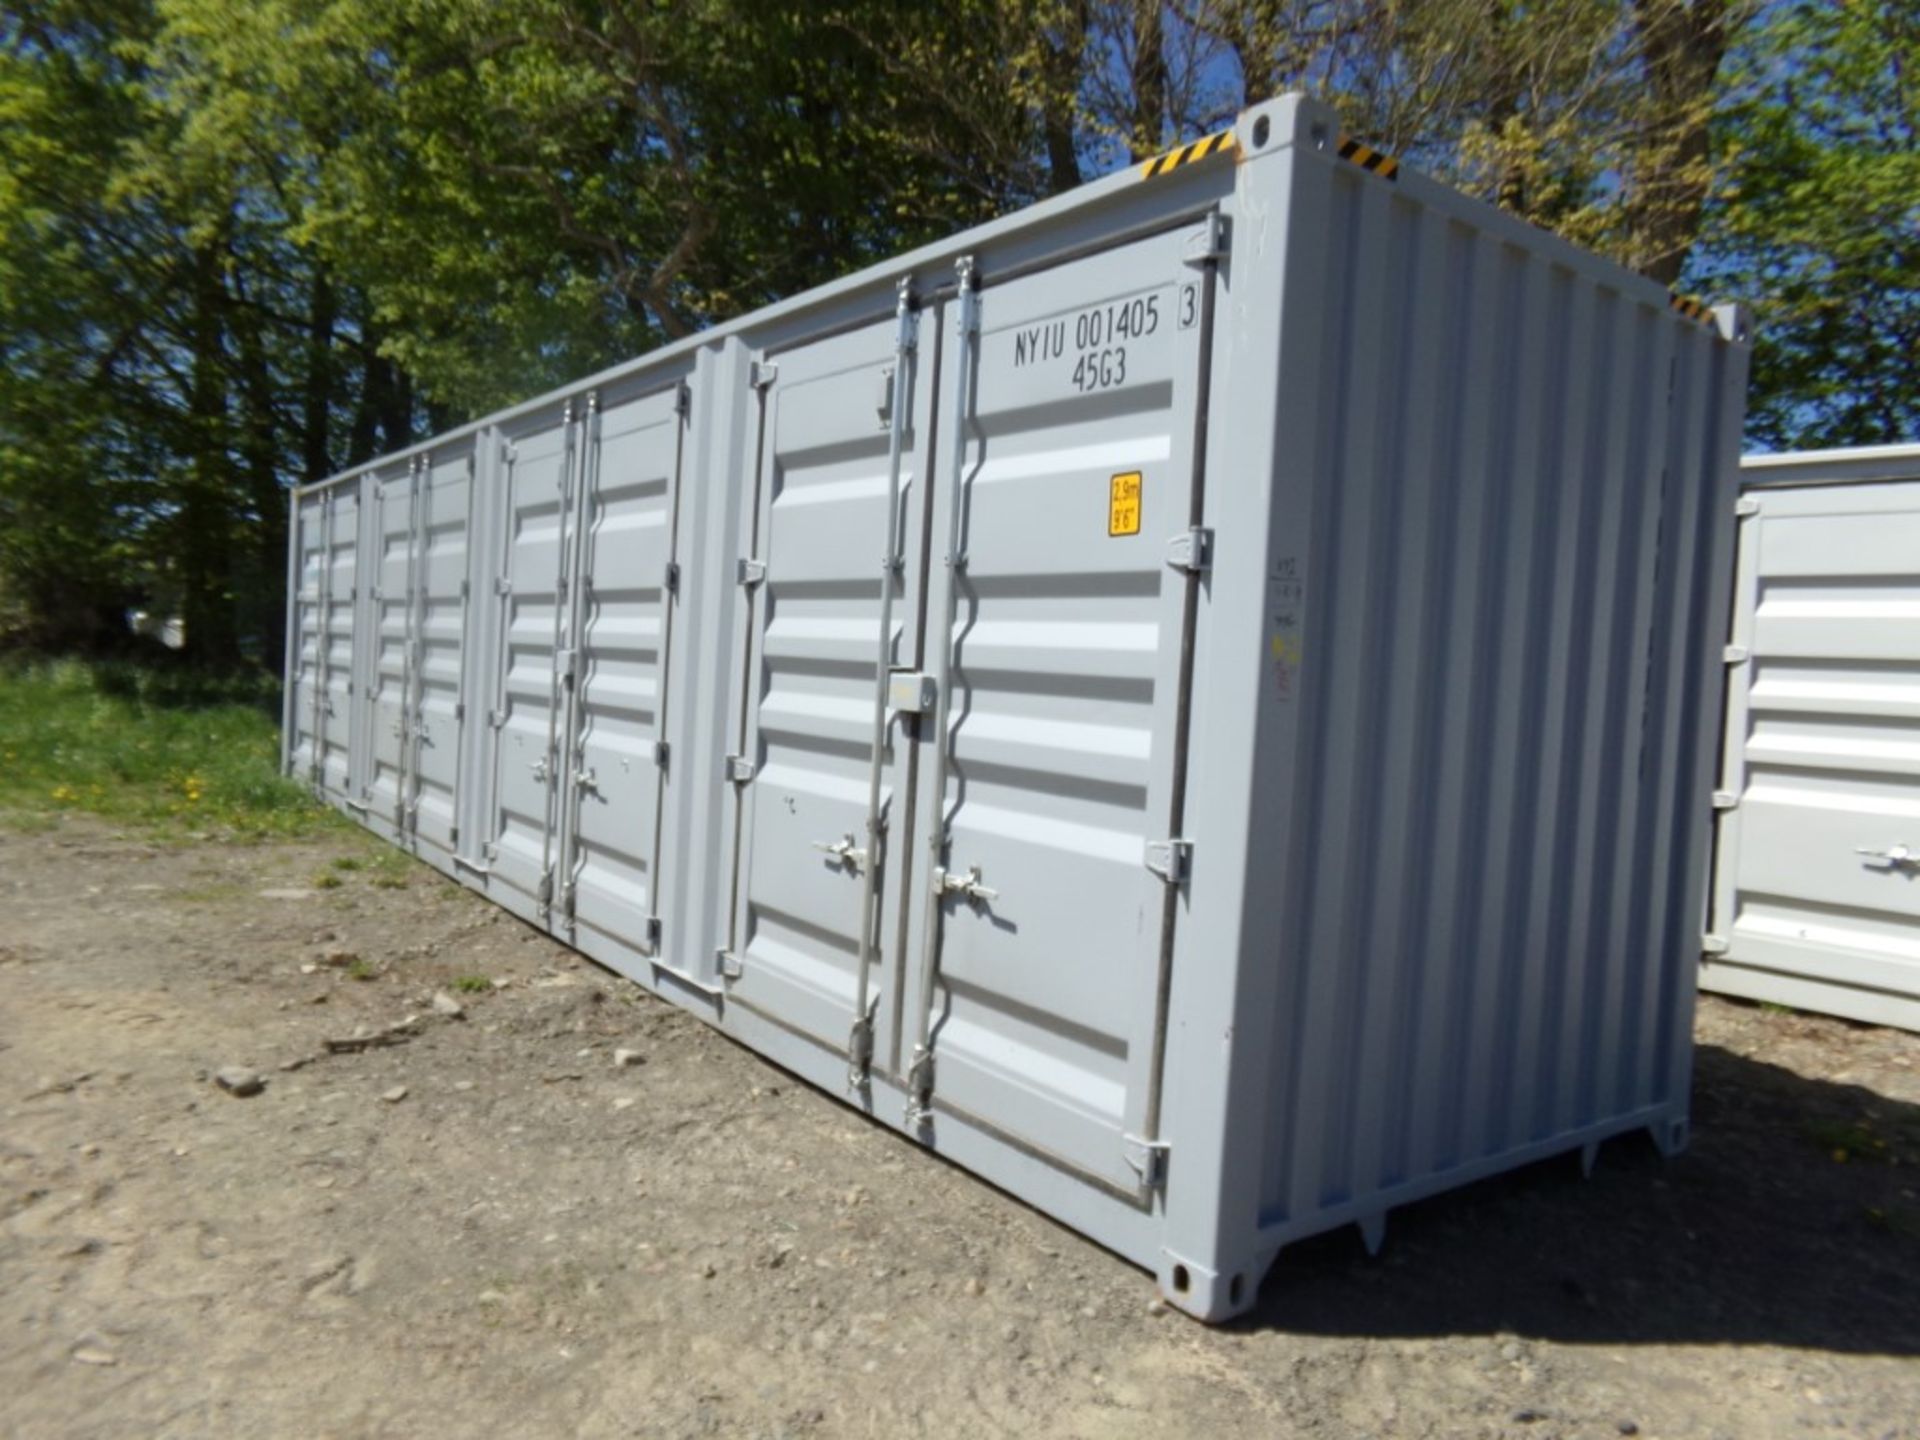 New 40' Light Gray Storage Container with (4) Side Access Doors, Barn Door on 1 End, Cont #